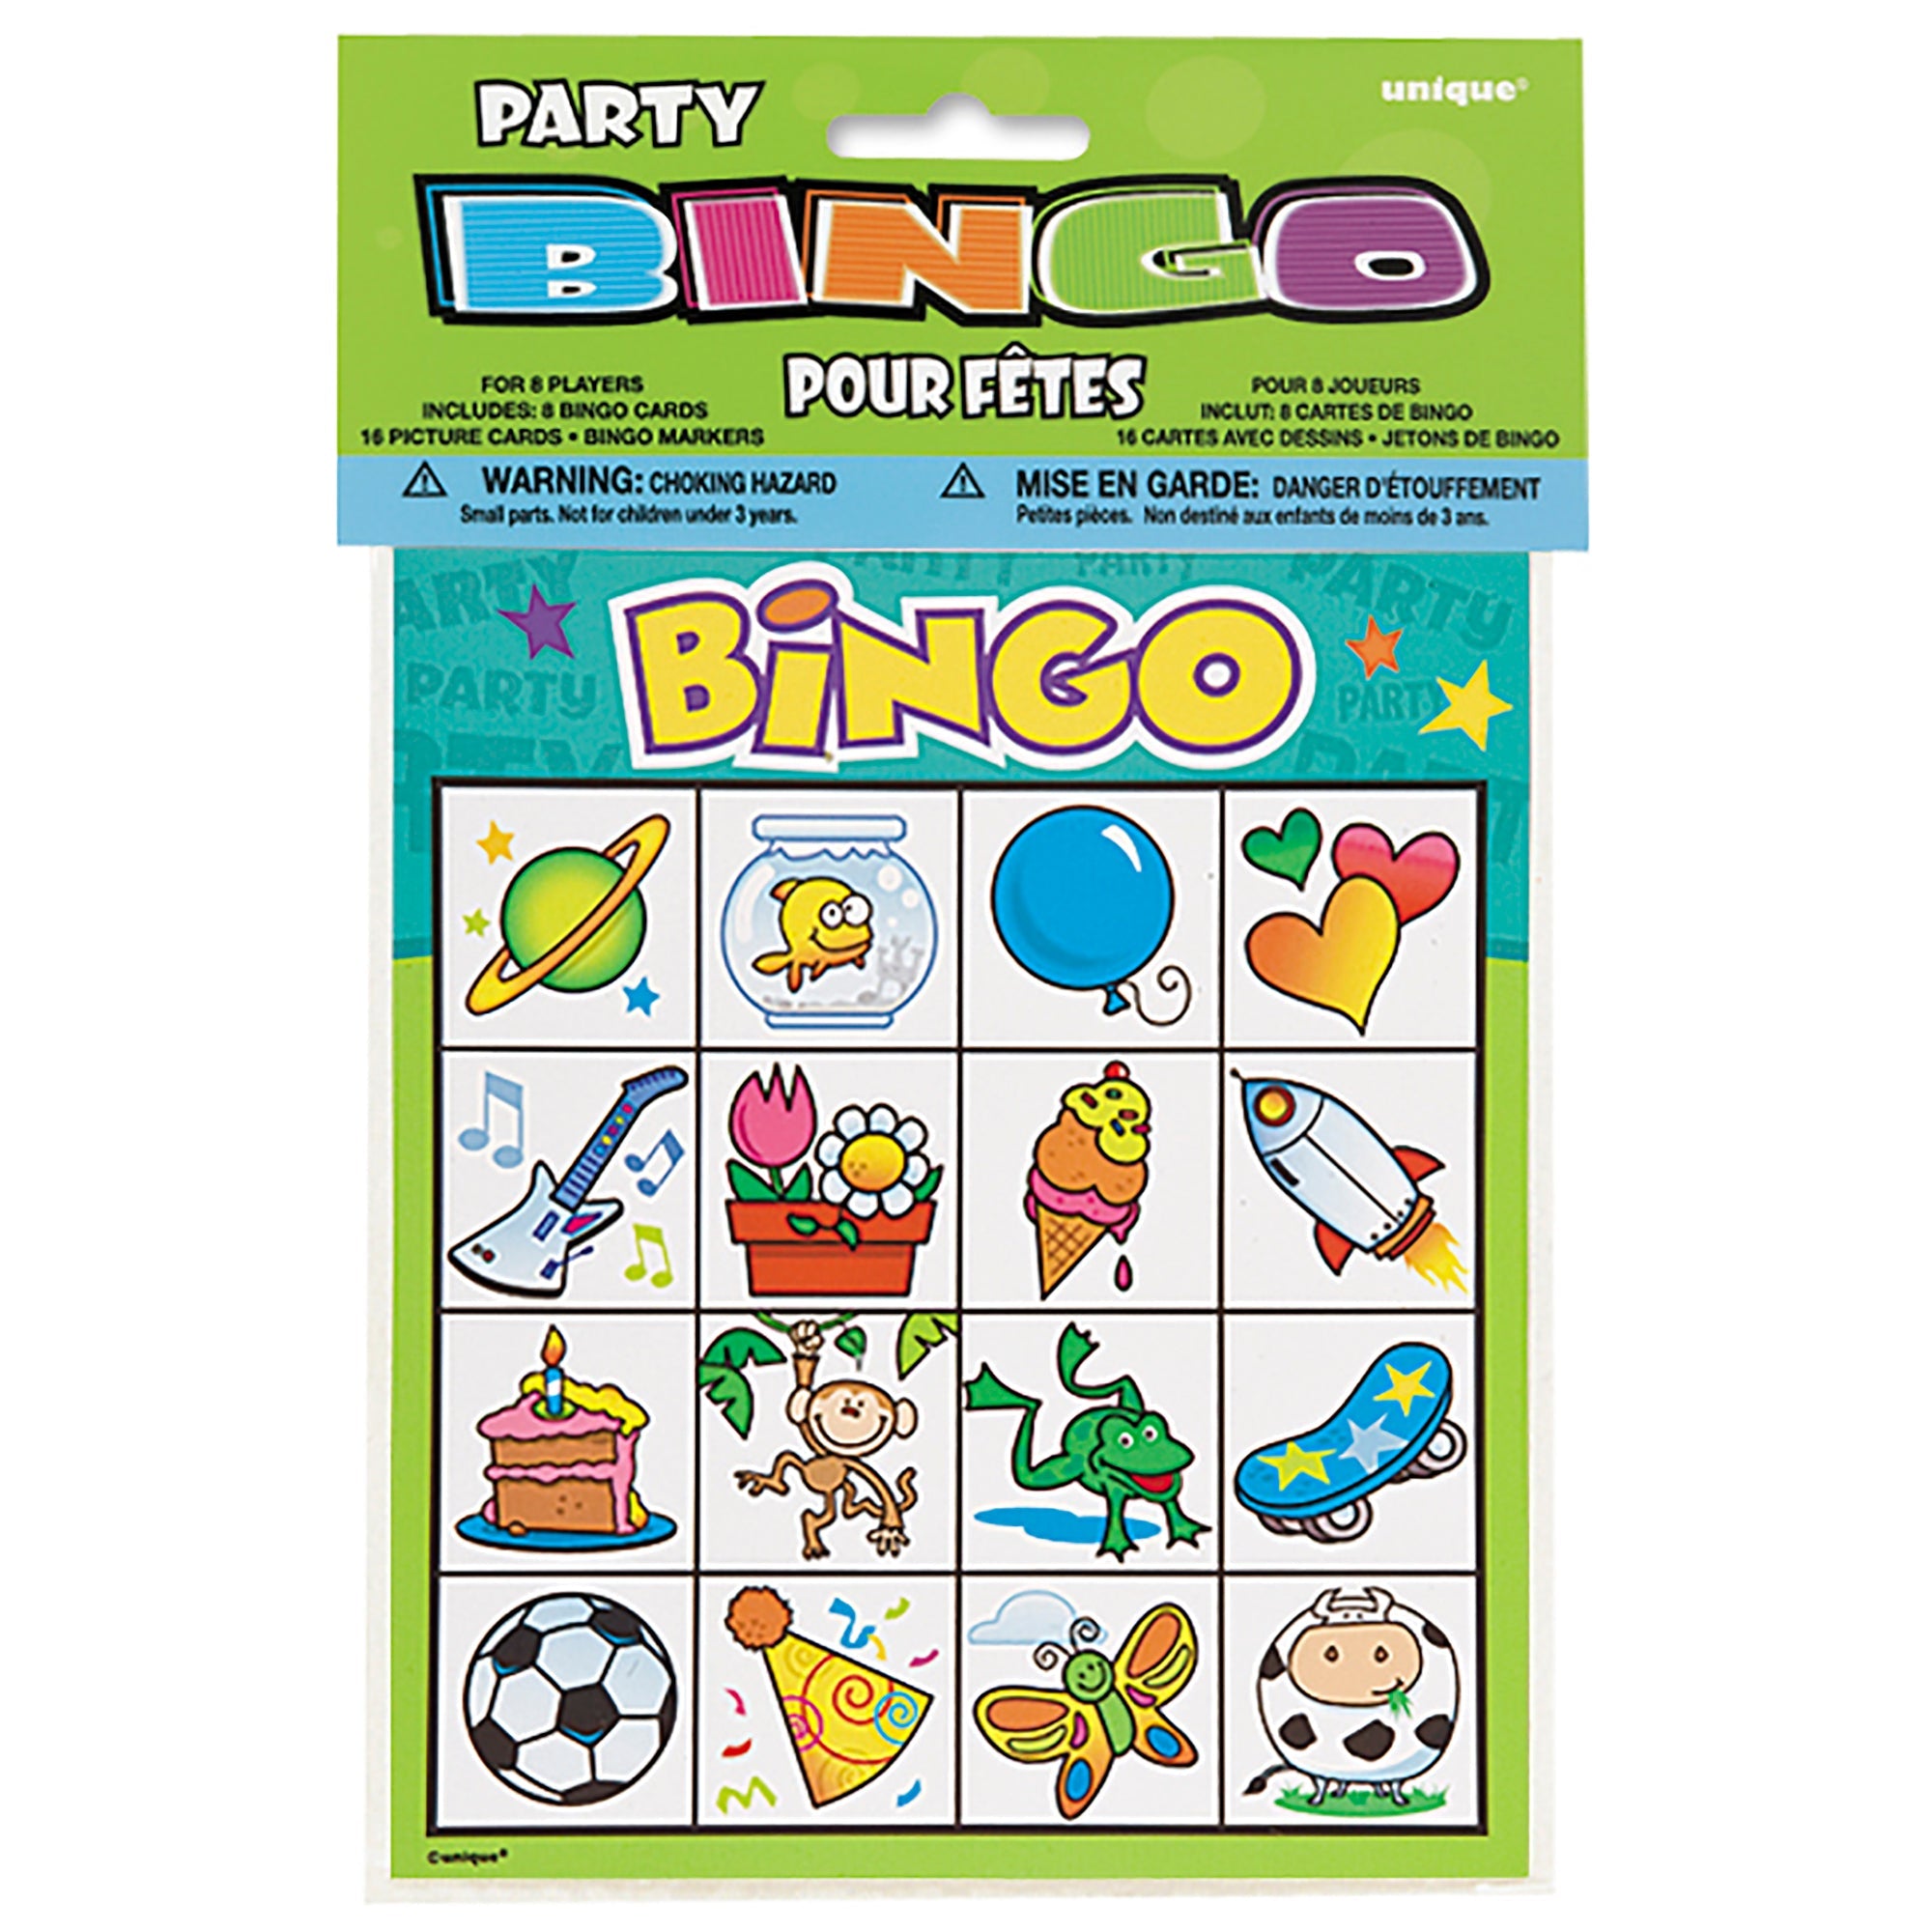 Party Bingo Game For 8